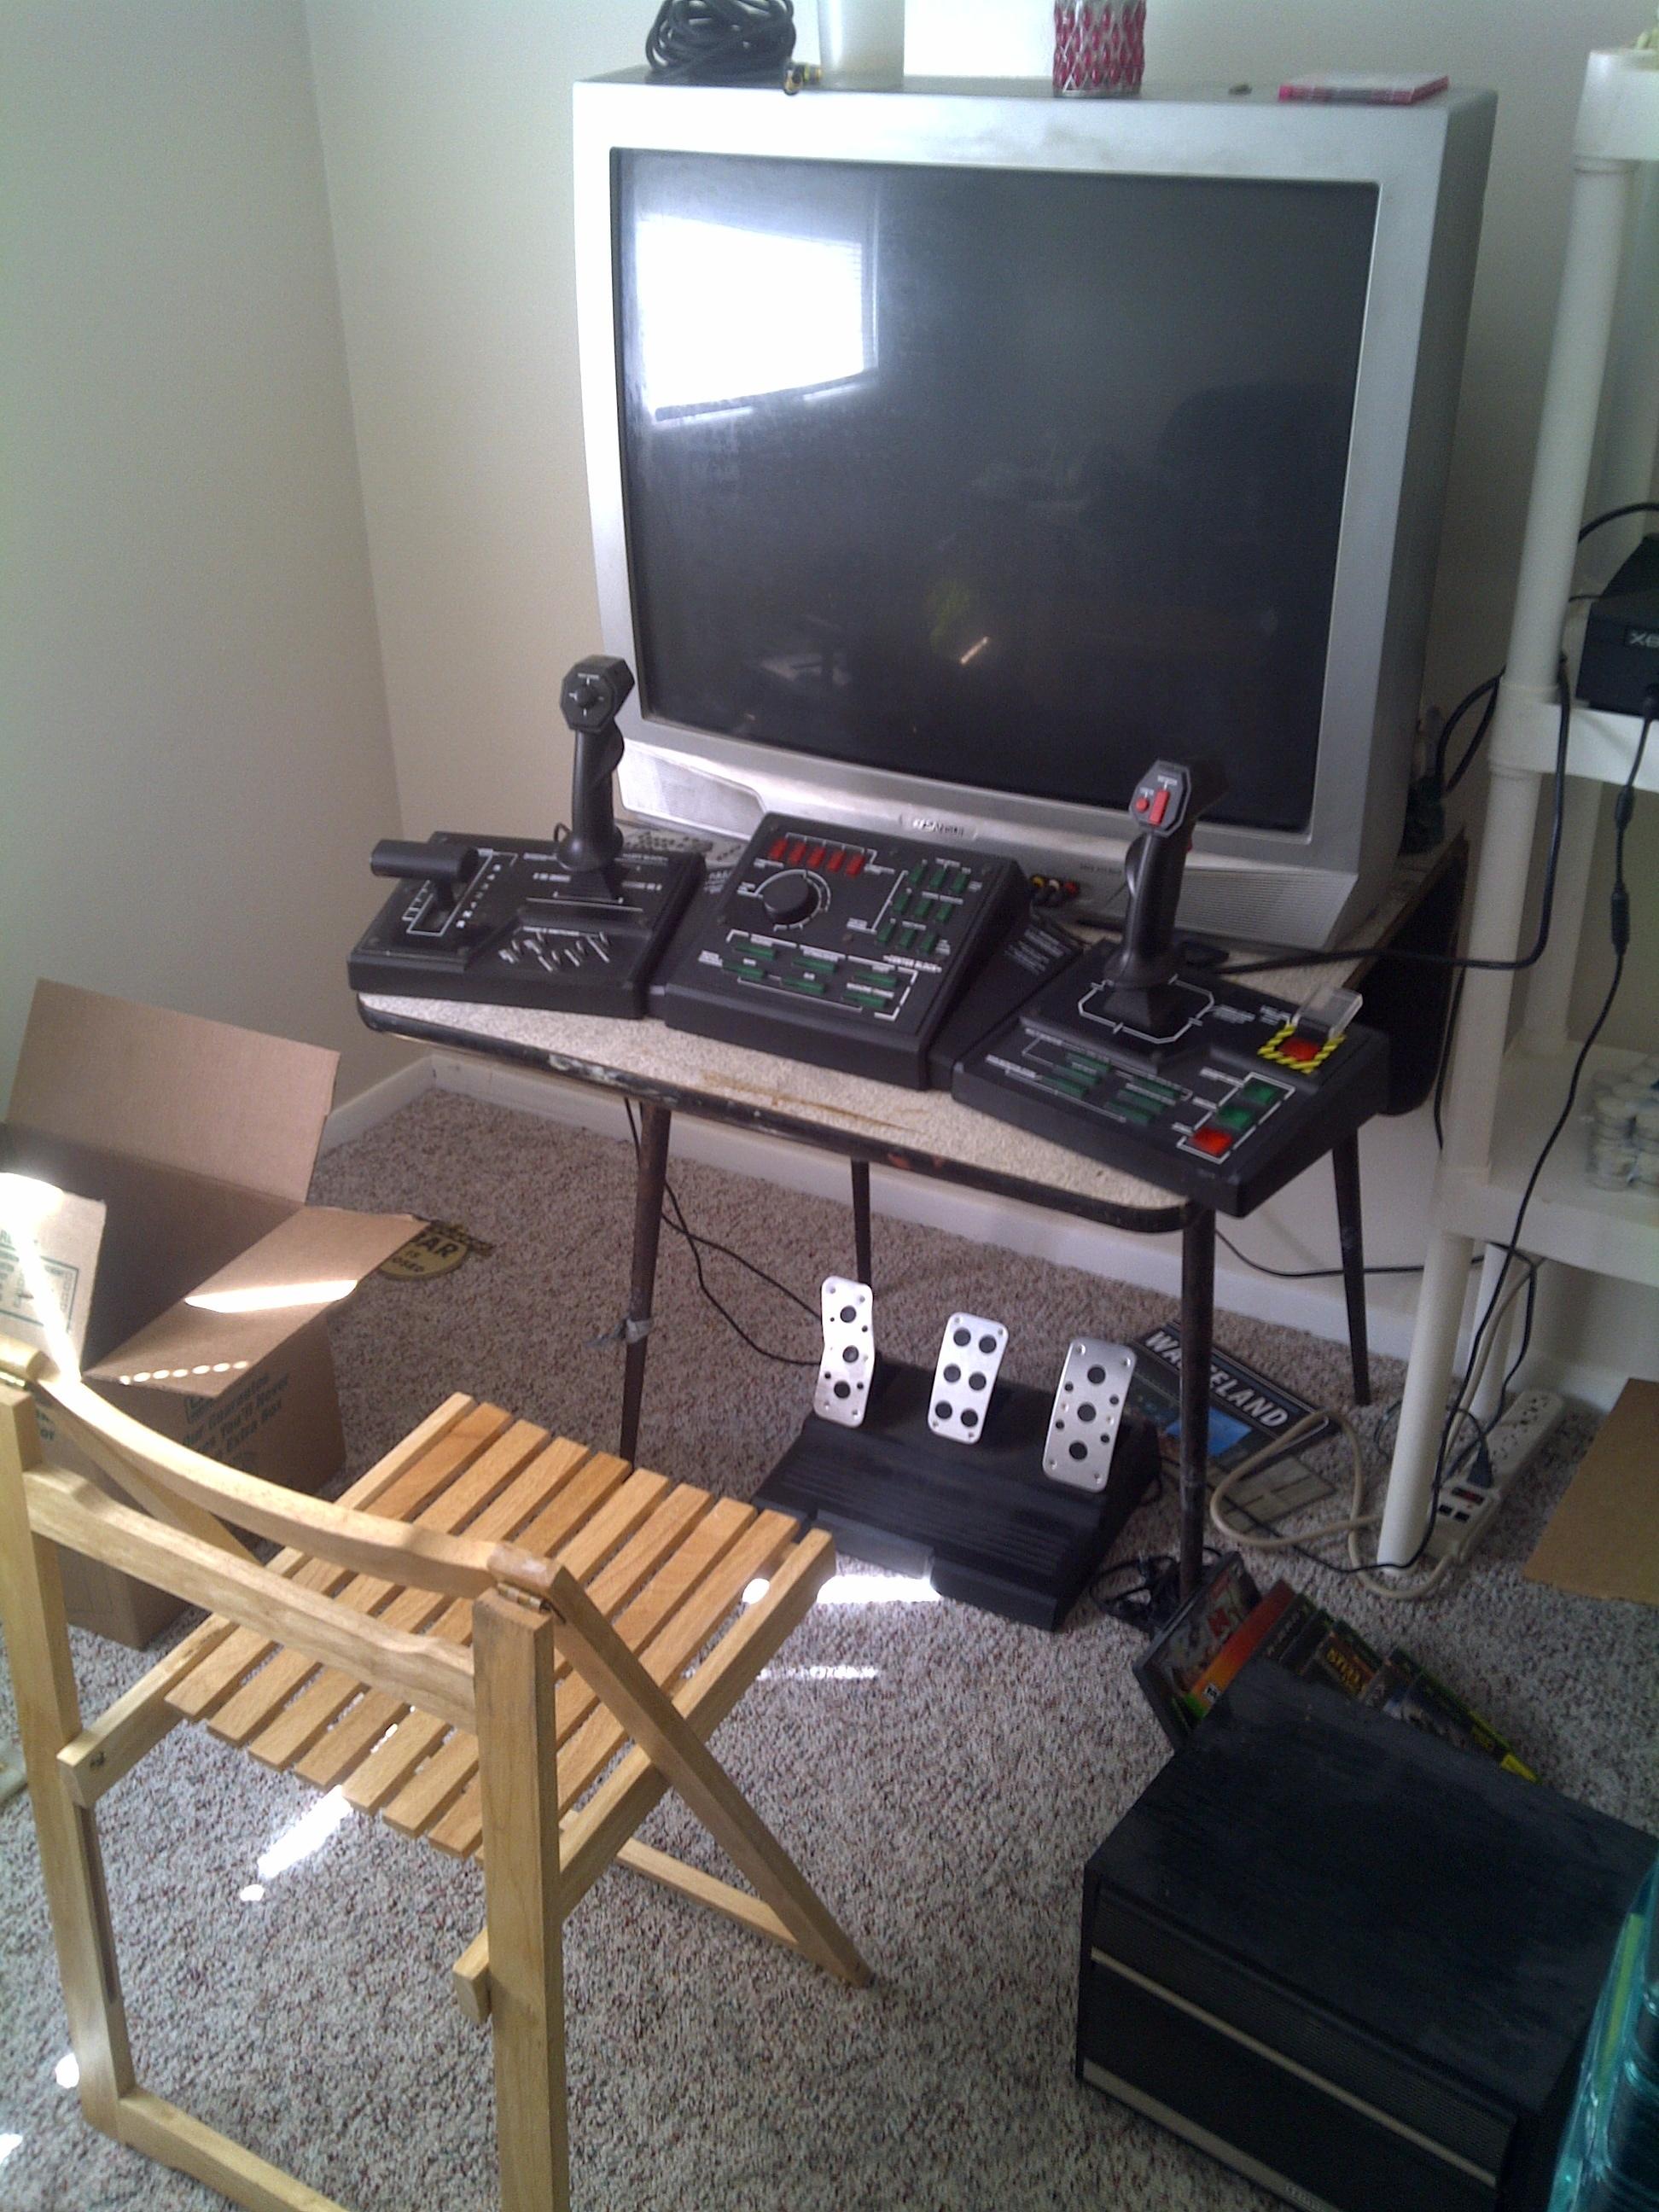 This seems like the setup of someone who enjoys playing flight sims and flight combat games.  Dual joysticks - Check.  Gas/Brake and Rudder Control Pedals - Check.  Old AF CRT TV sitting on top of a flimsy ass fold-able table - Check mate.